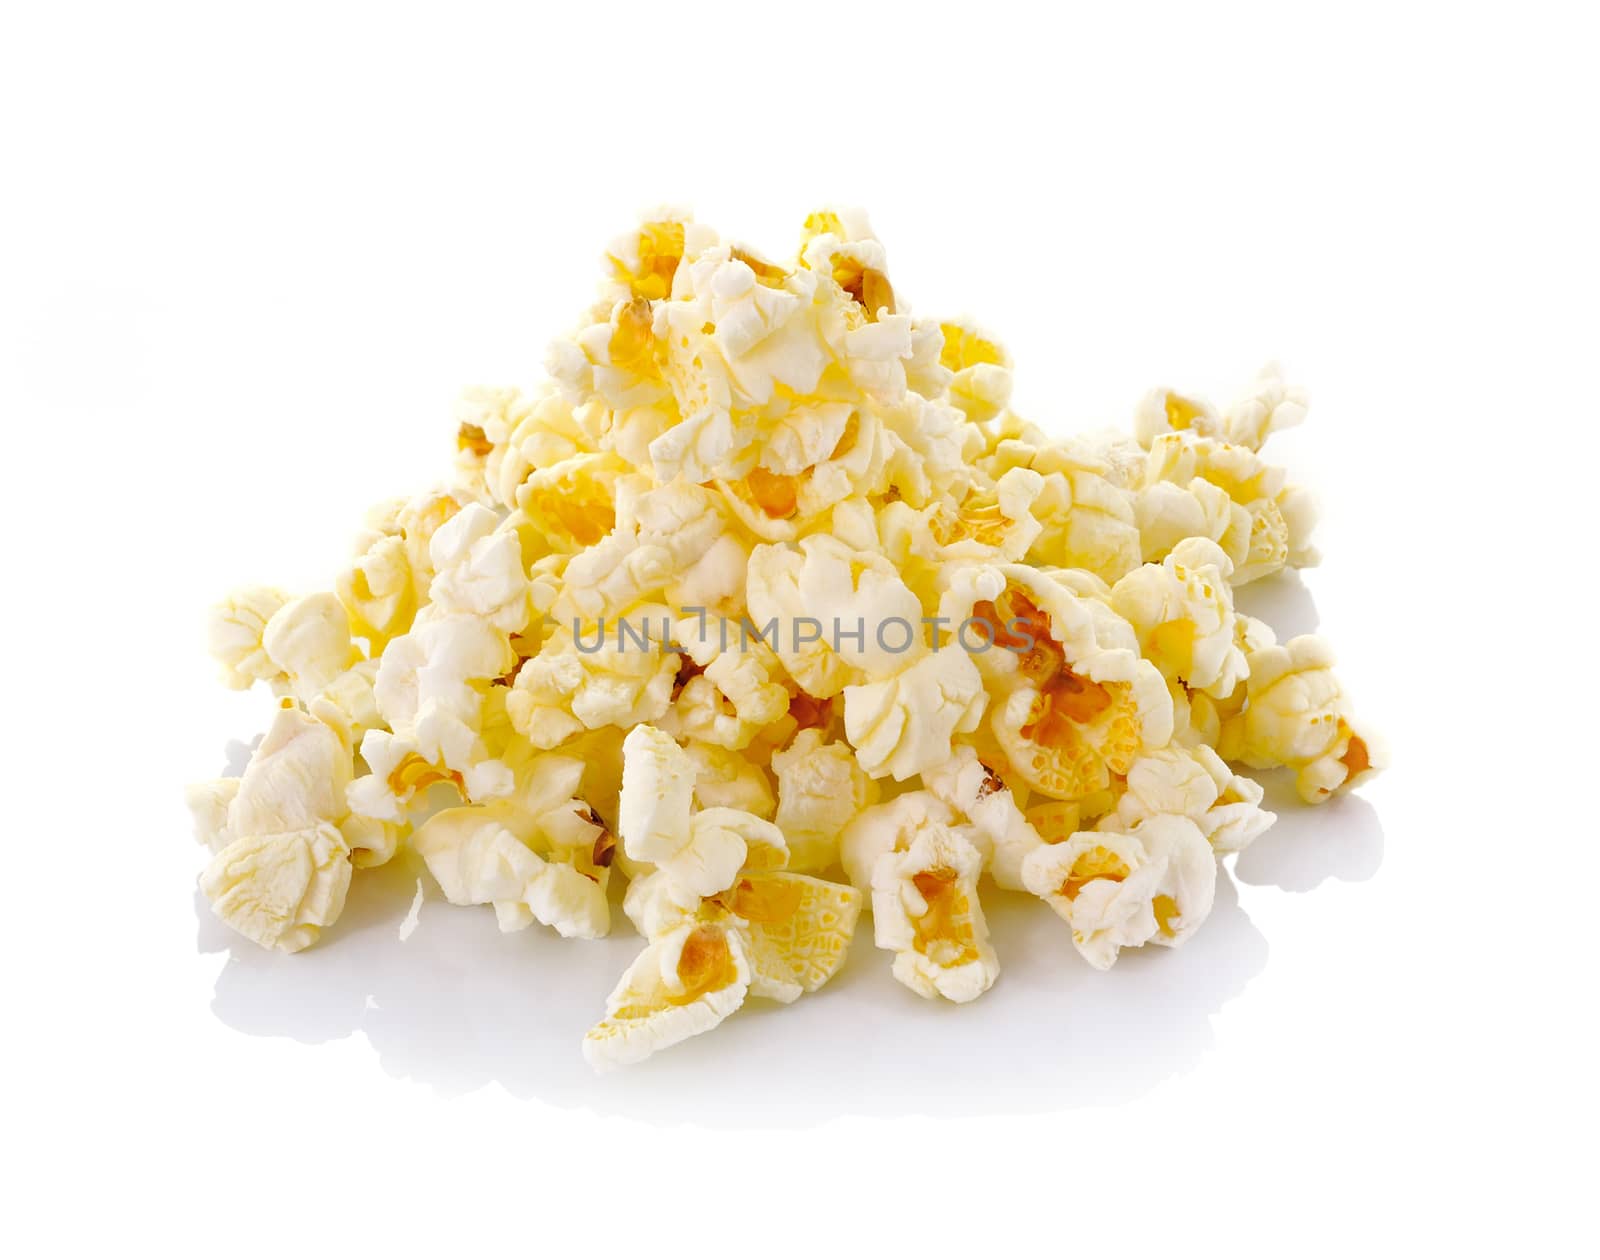 Pop Corn isolated on white background